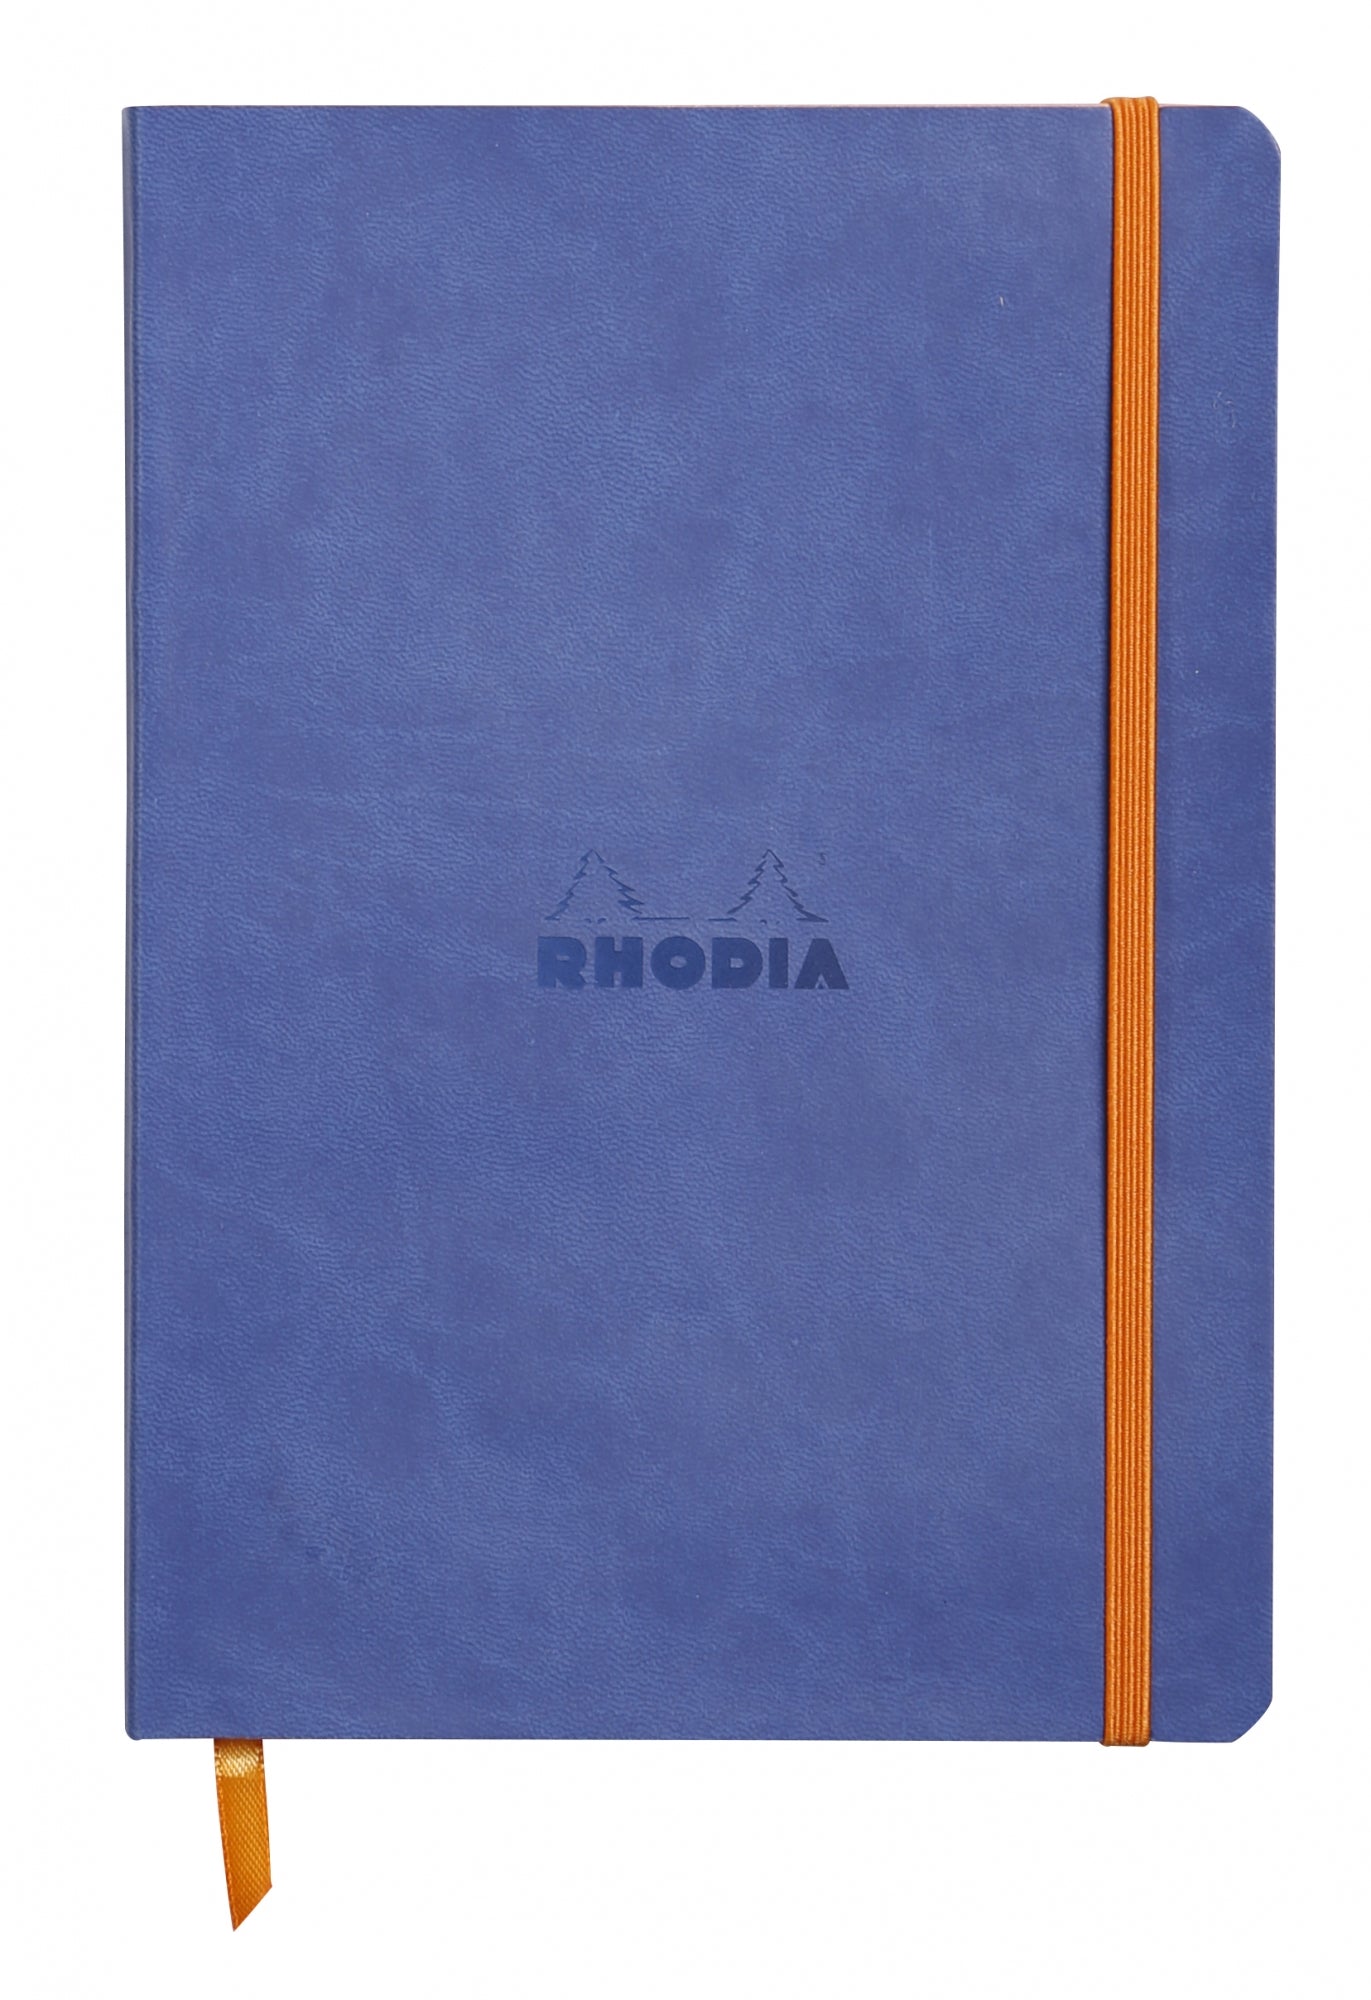 Rhodia Rhodiarama Sapphire A5 Soft Cover Lined Notebook